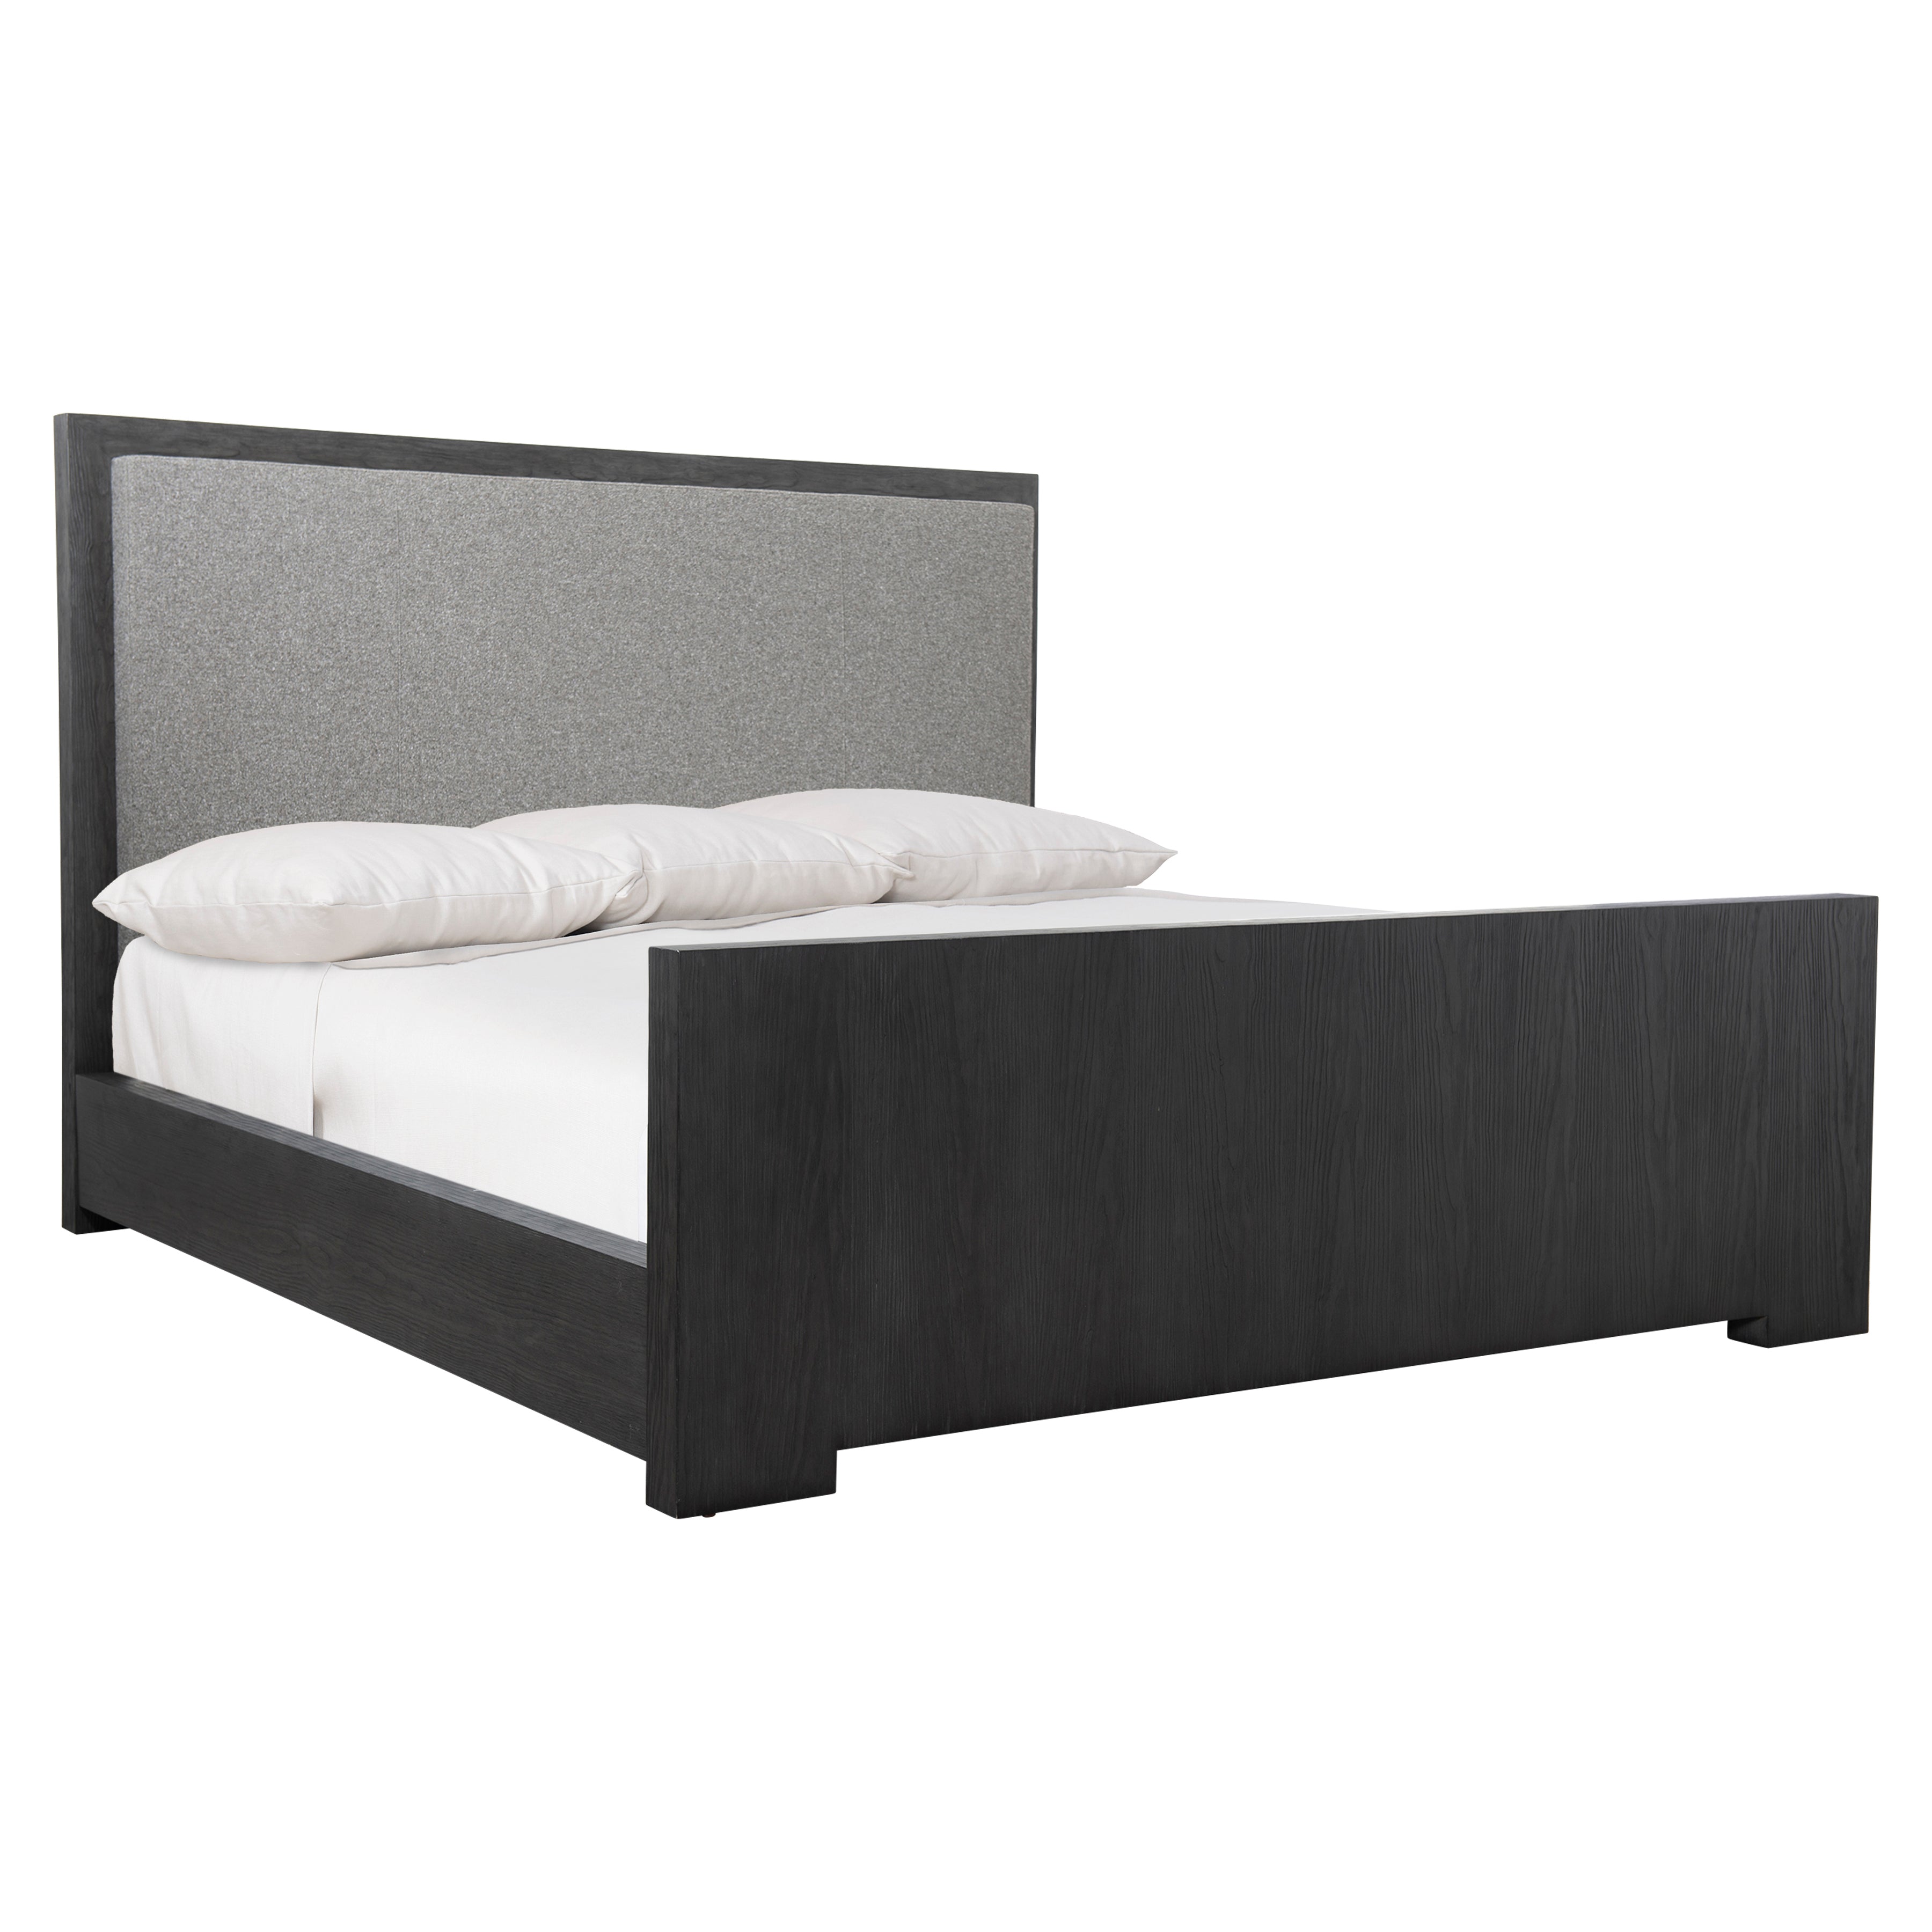 Trianon California King Panel Bed in L'Ombre Wood Finish